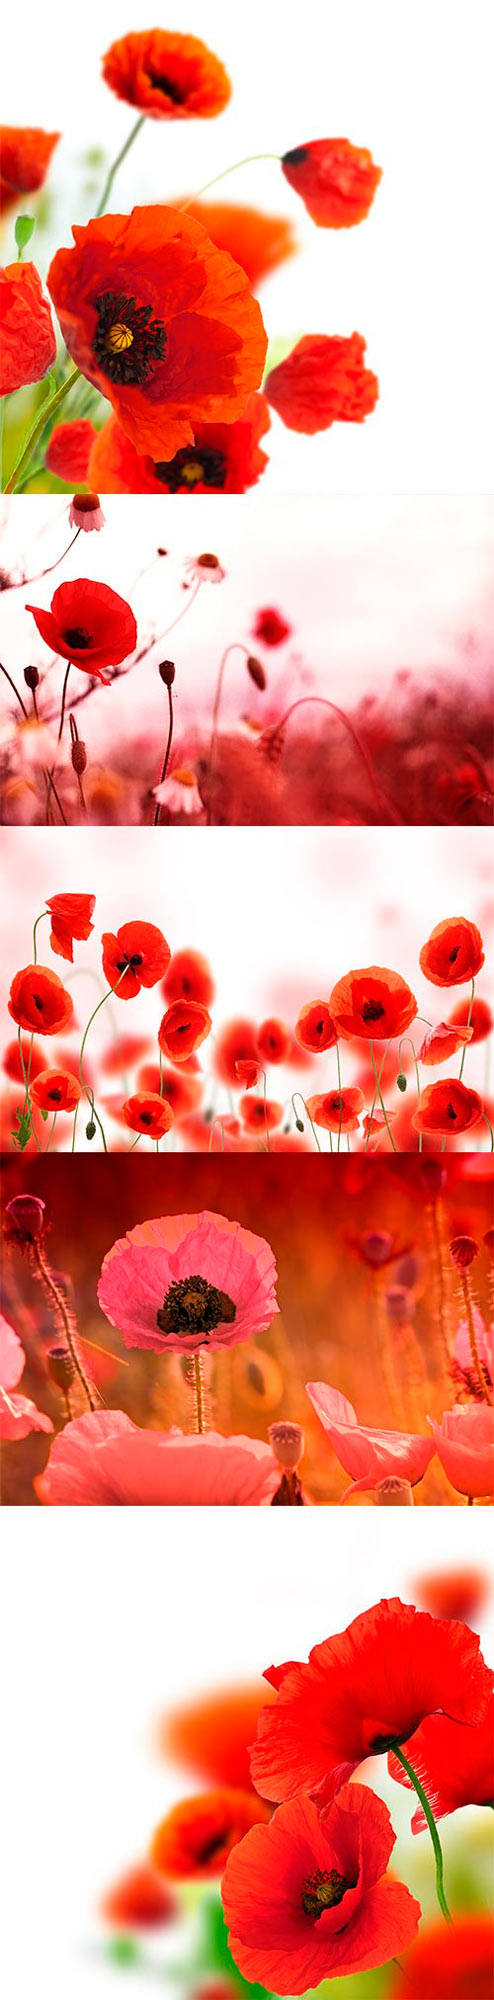 Poppies white background, green and red floral design